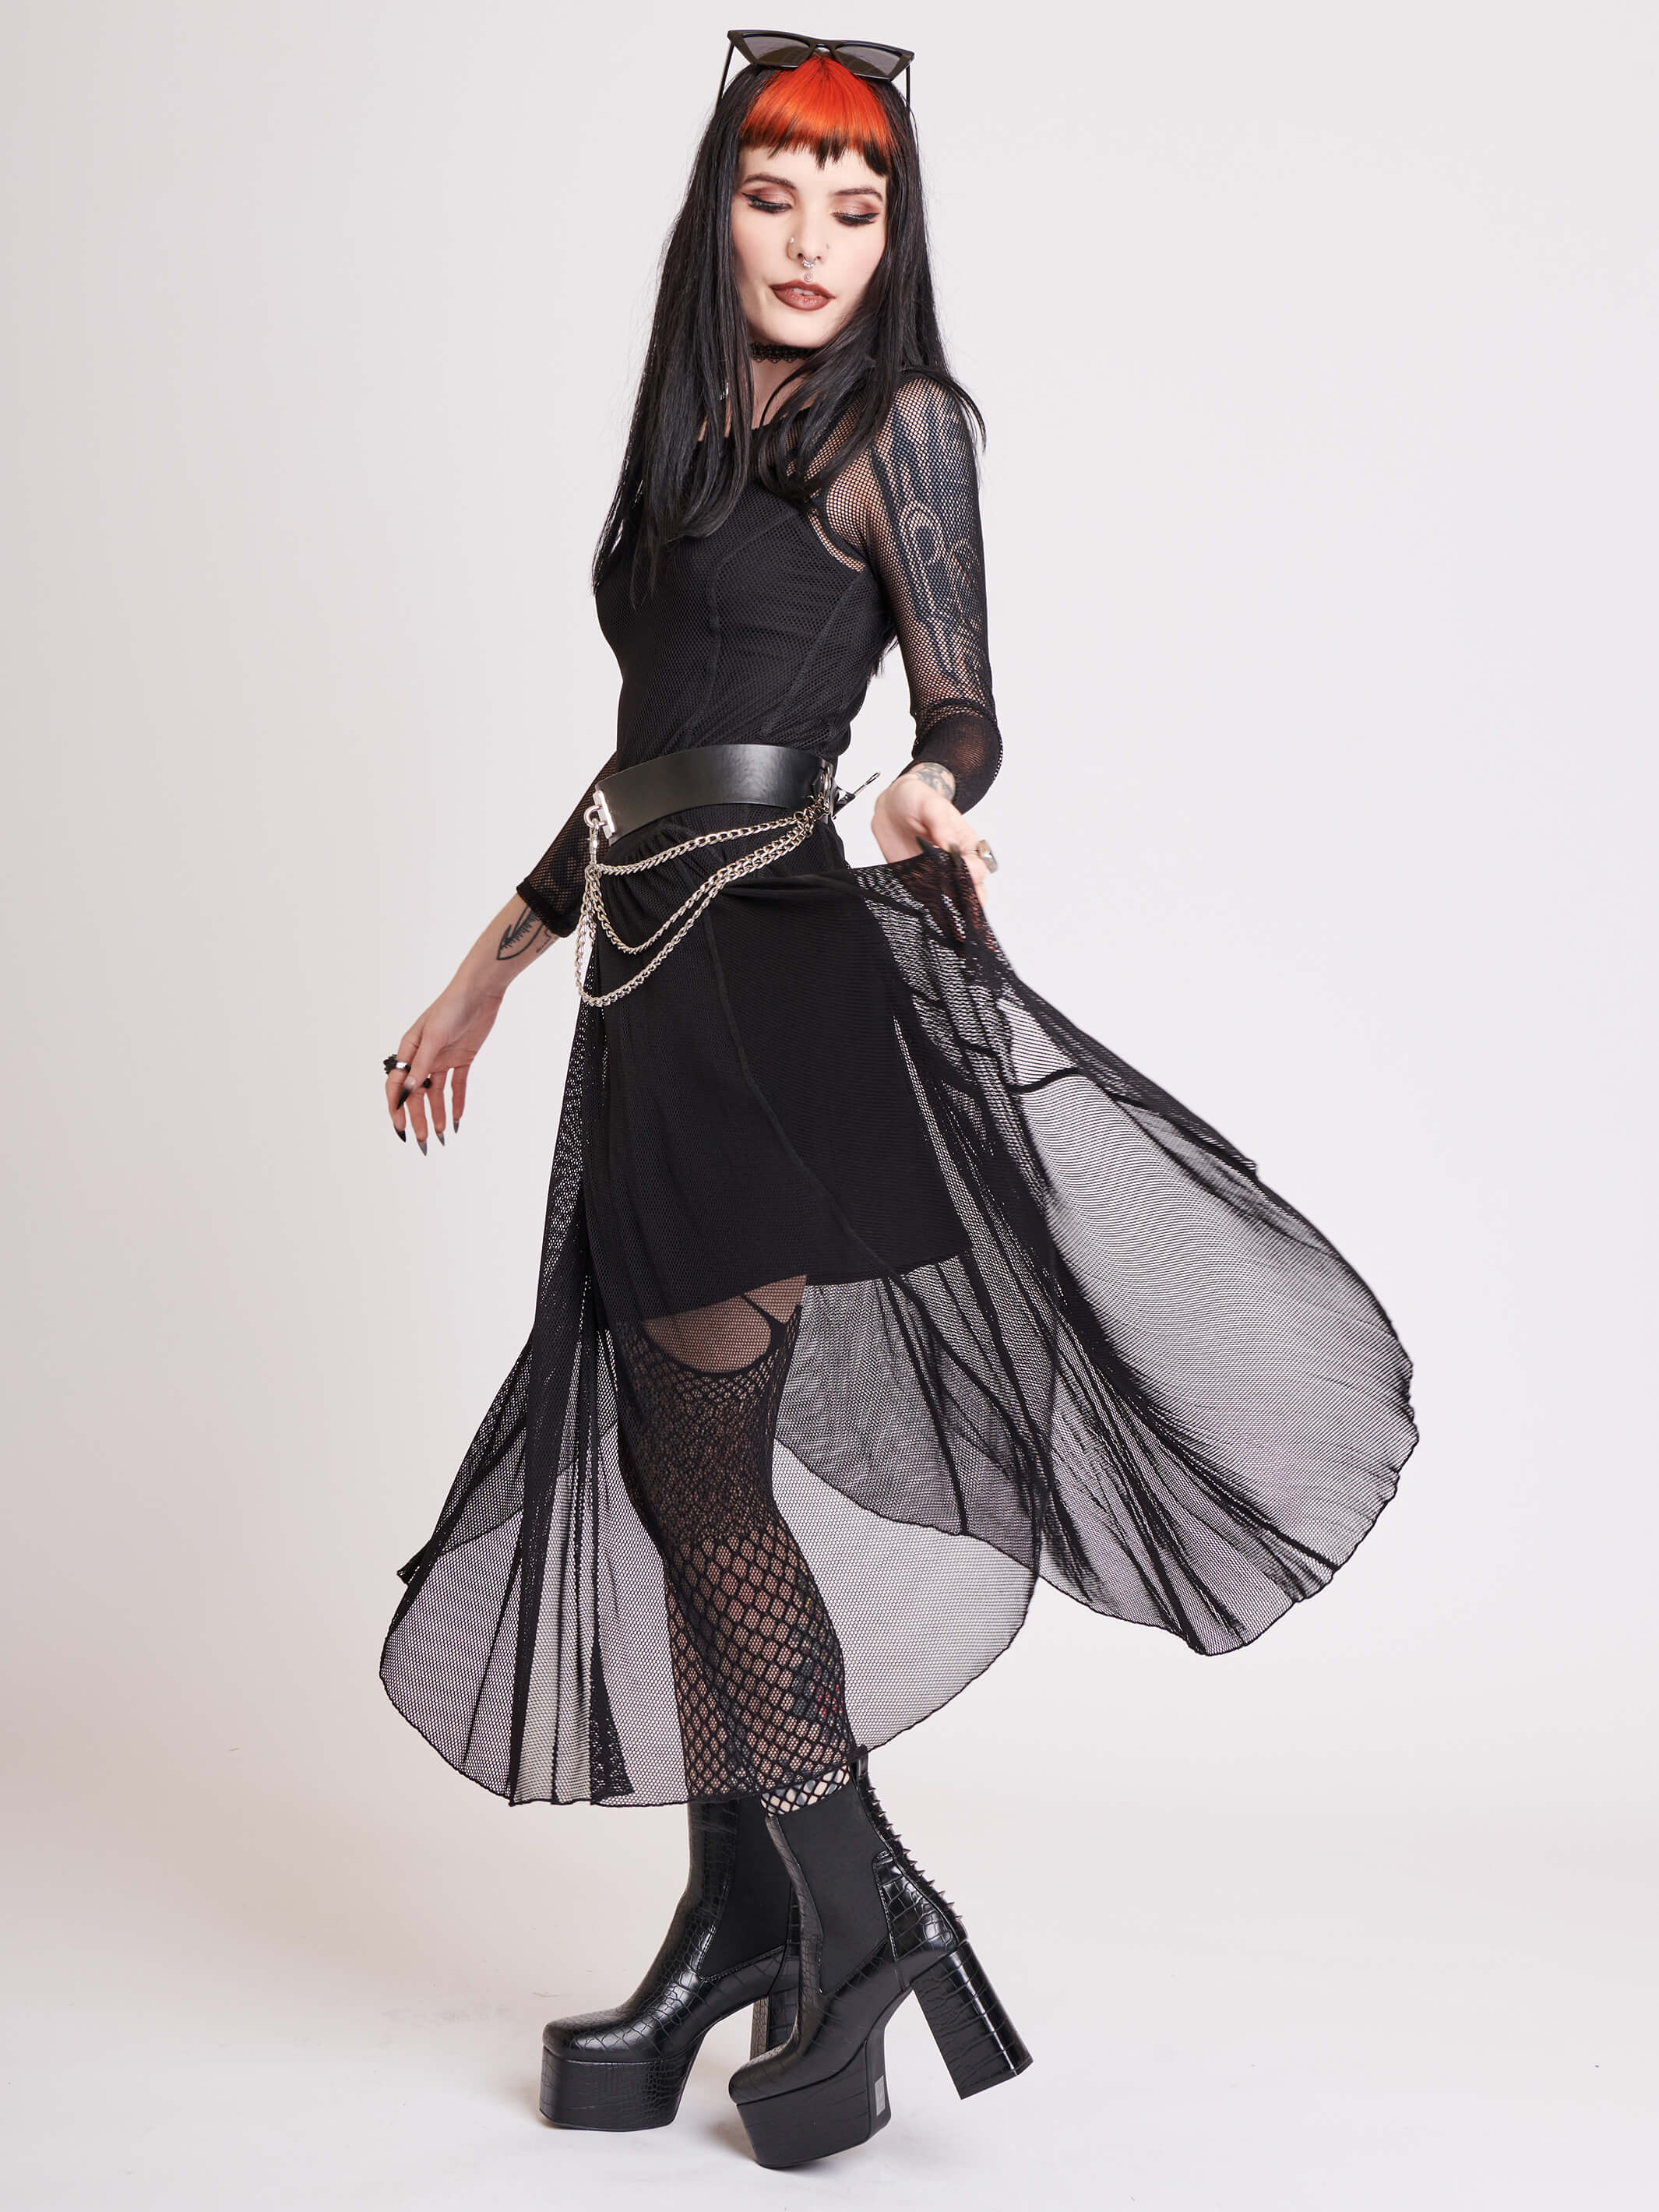 Goth Clothing Shops  Gothic Fashion Stores - Quirky Shops